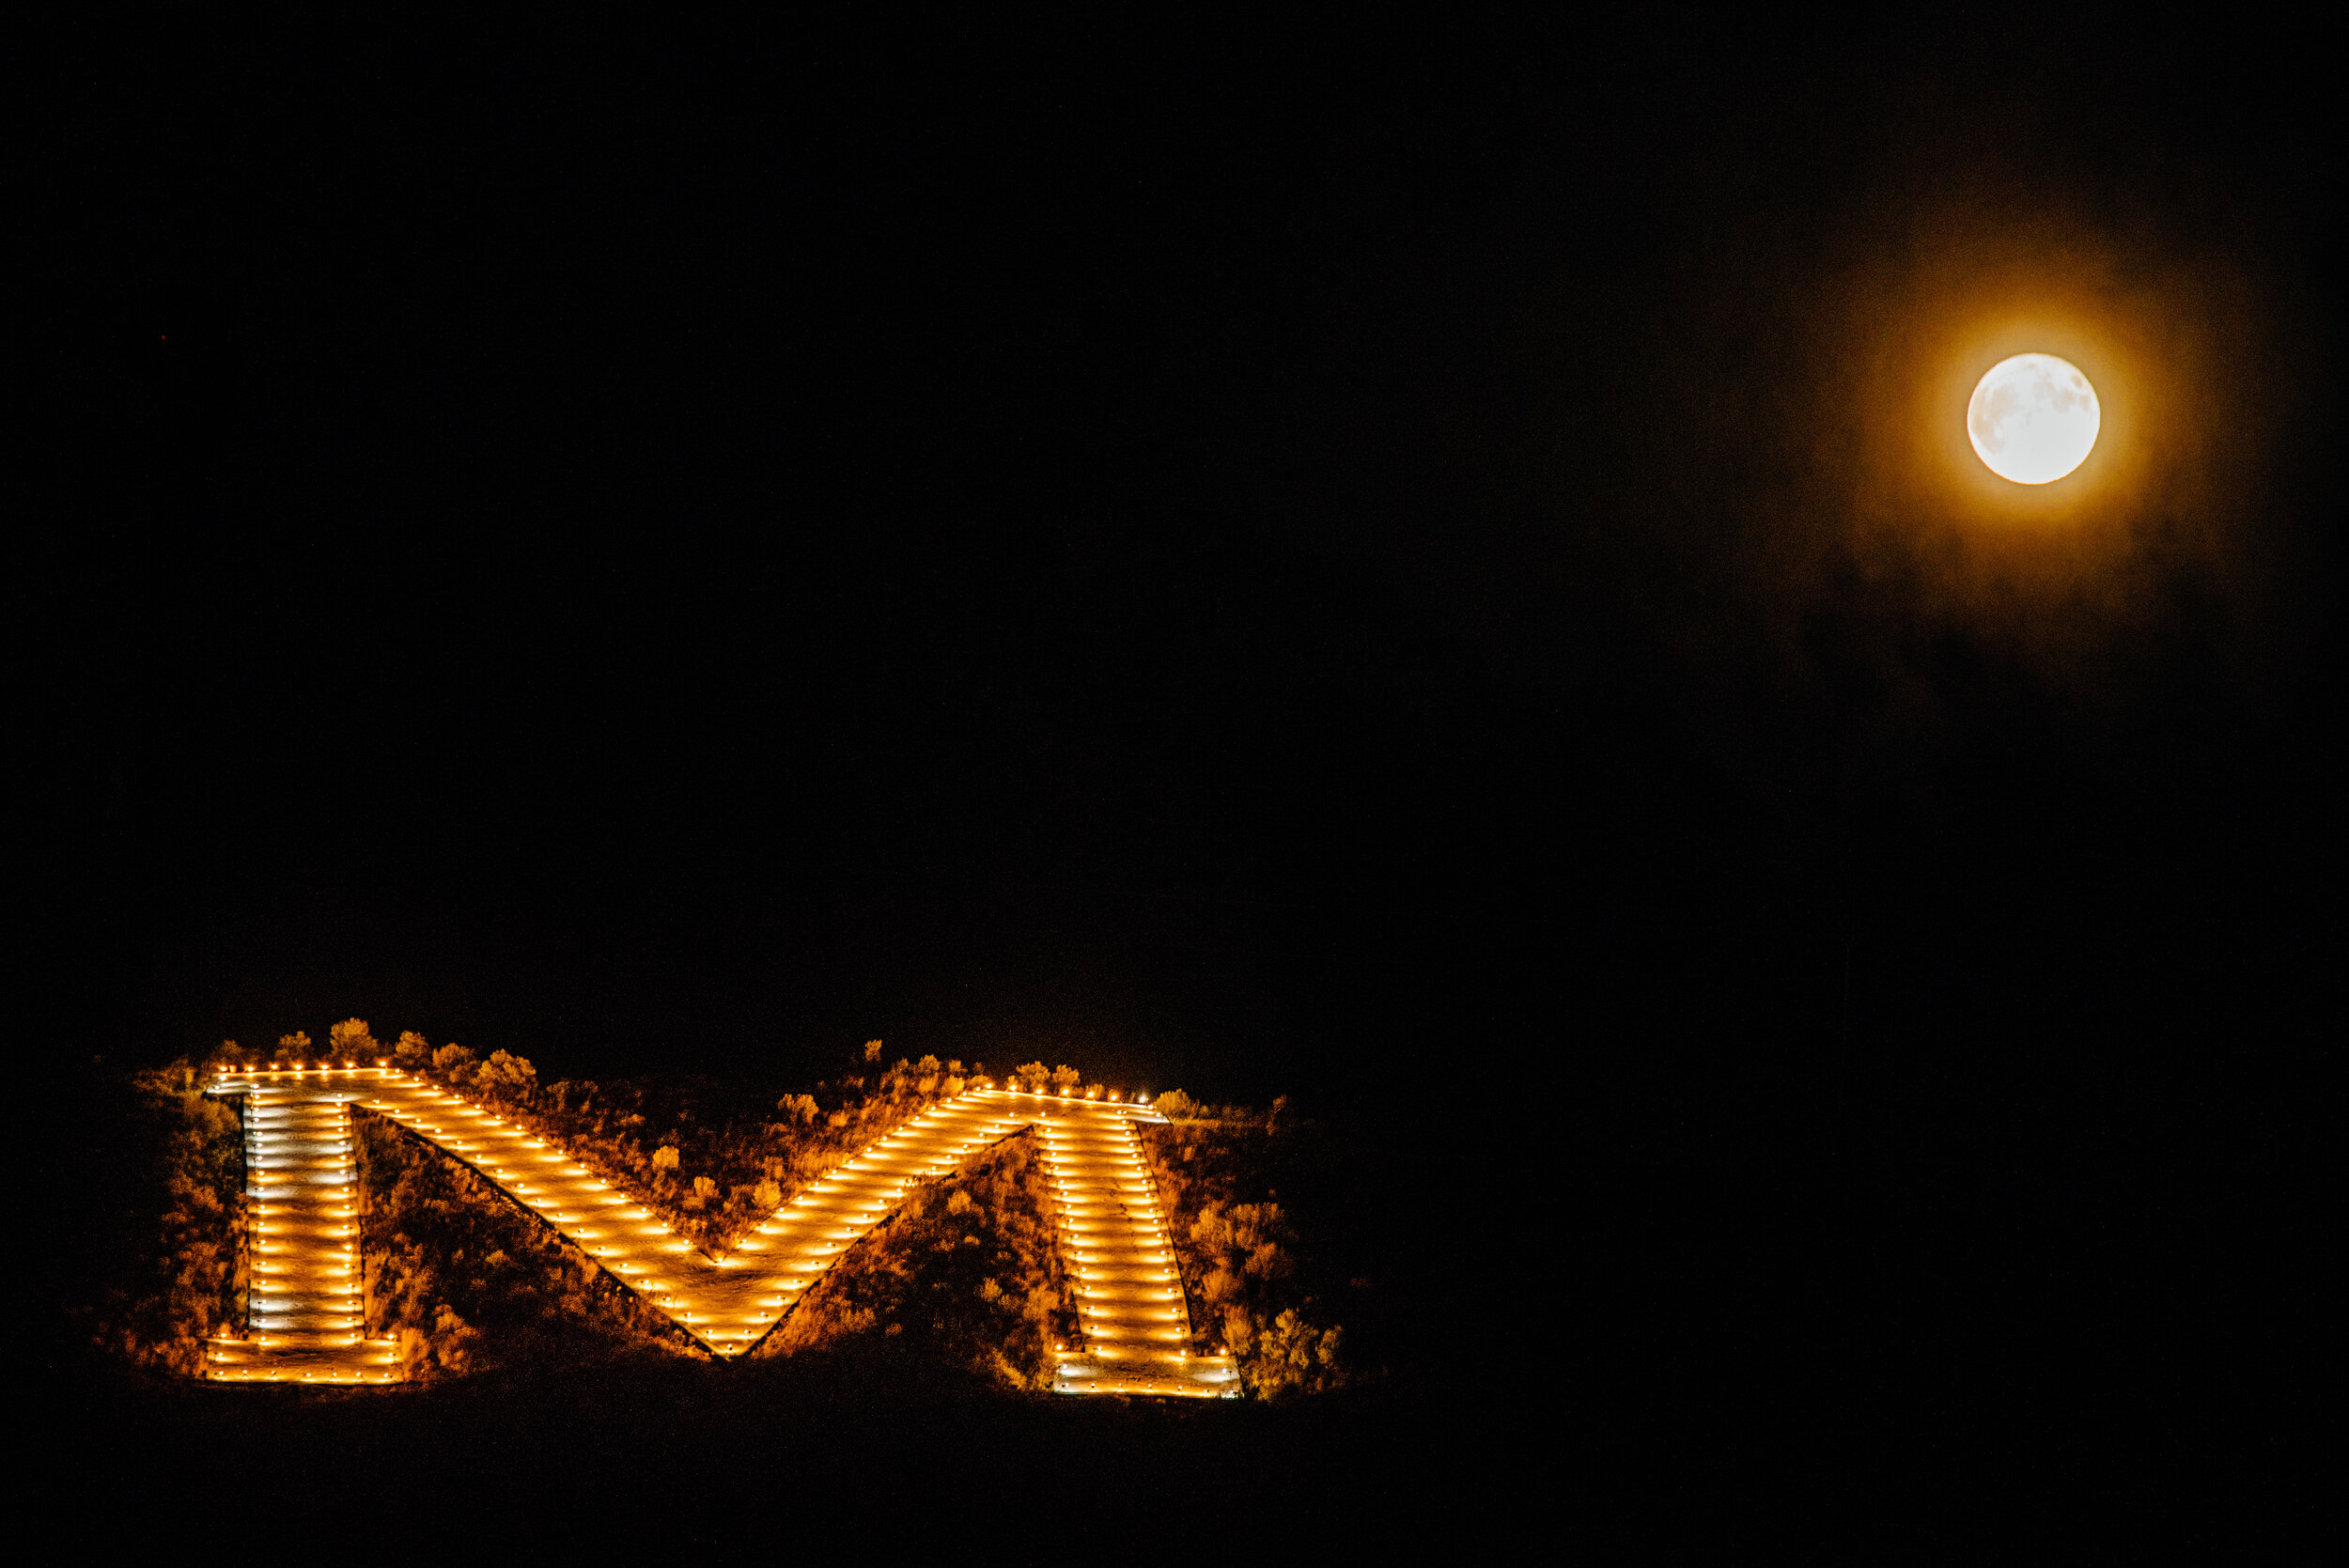 In the tiny town of Monteplier, ID, I discovered the largest &amp; most illuminated letter on a hill behind the town I'd seen in my whole life. And even caught the full moon!